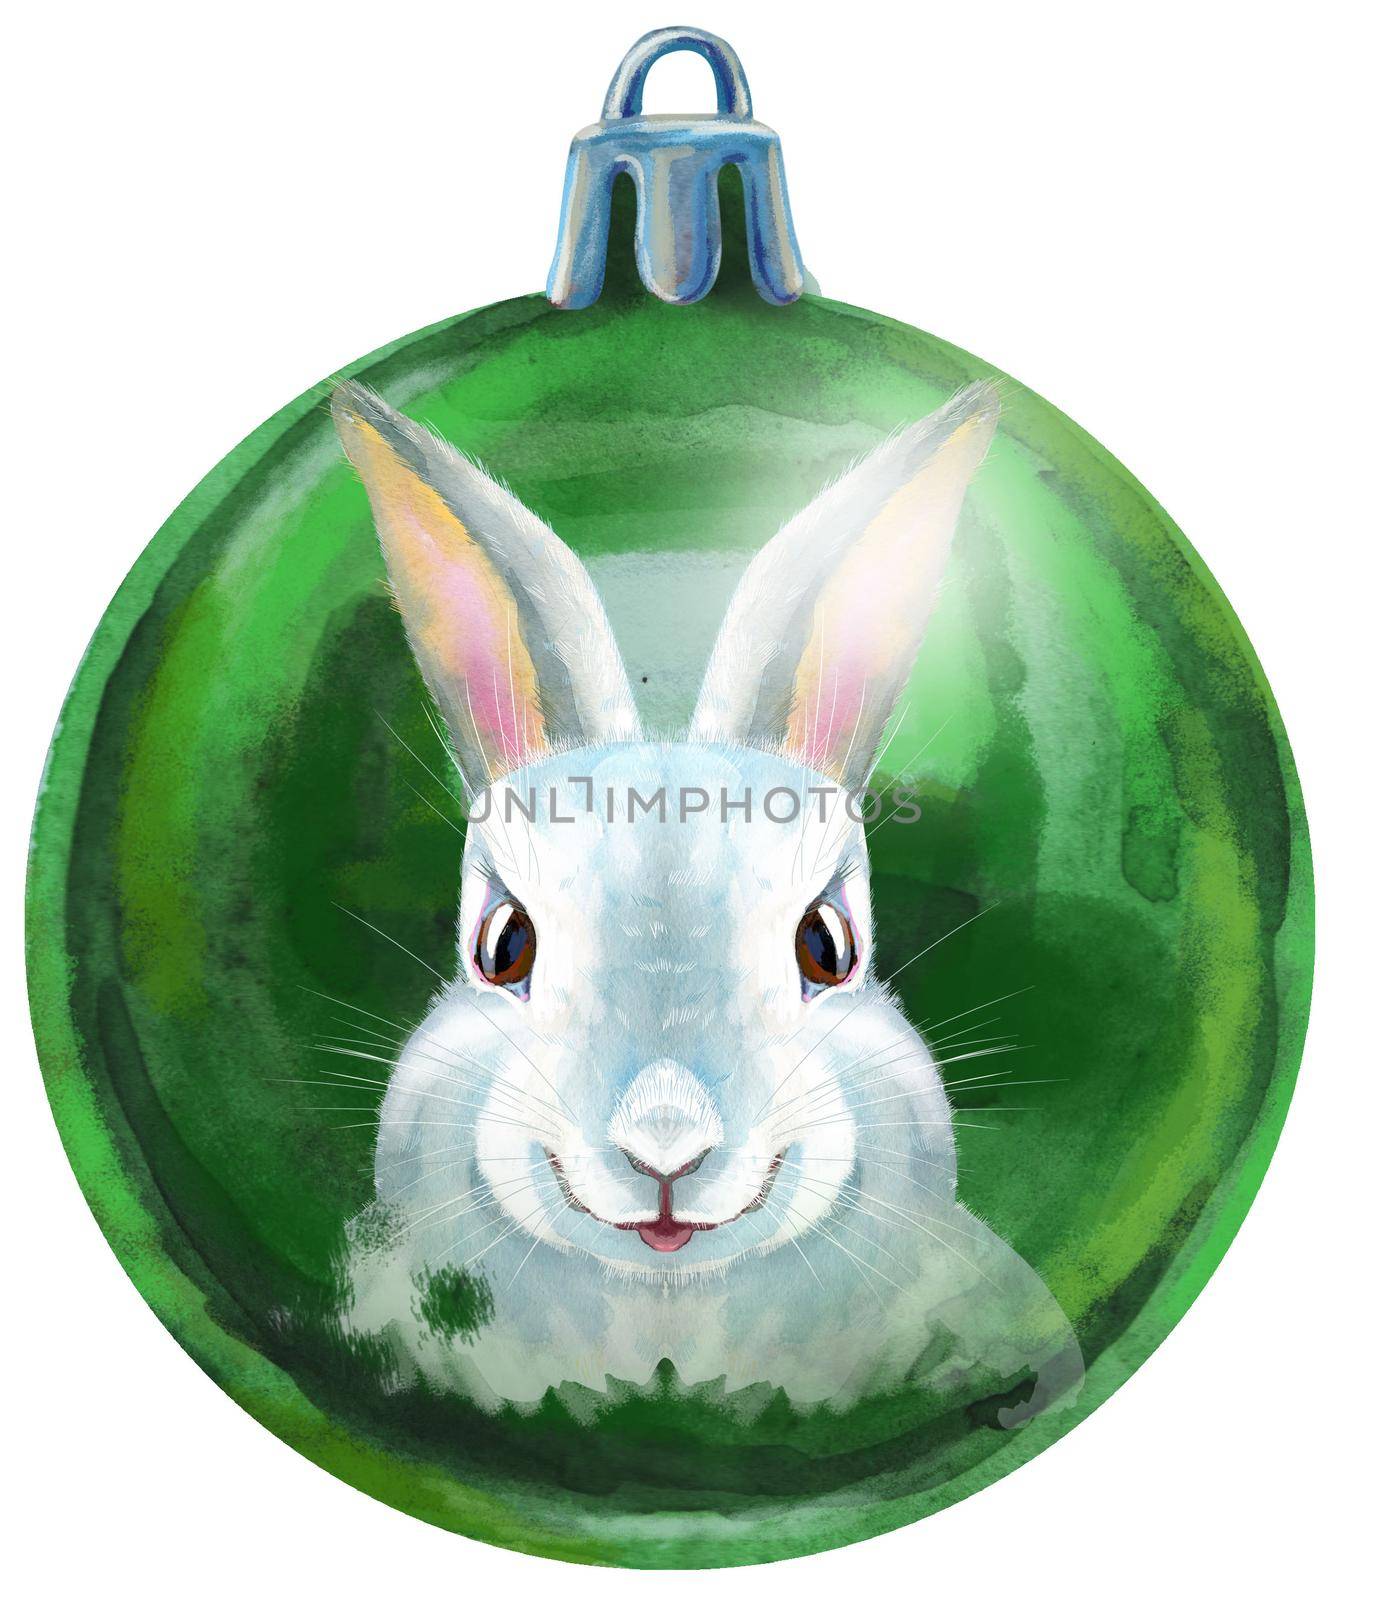 Watercolor Christmas green ball with white rabbit isolated on a white background.